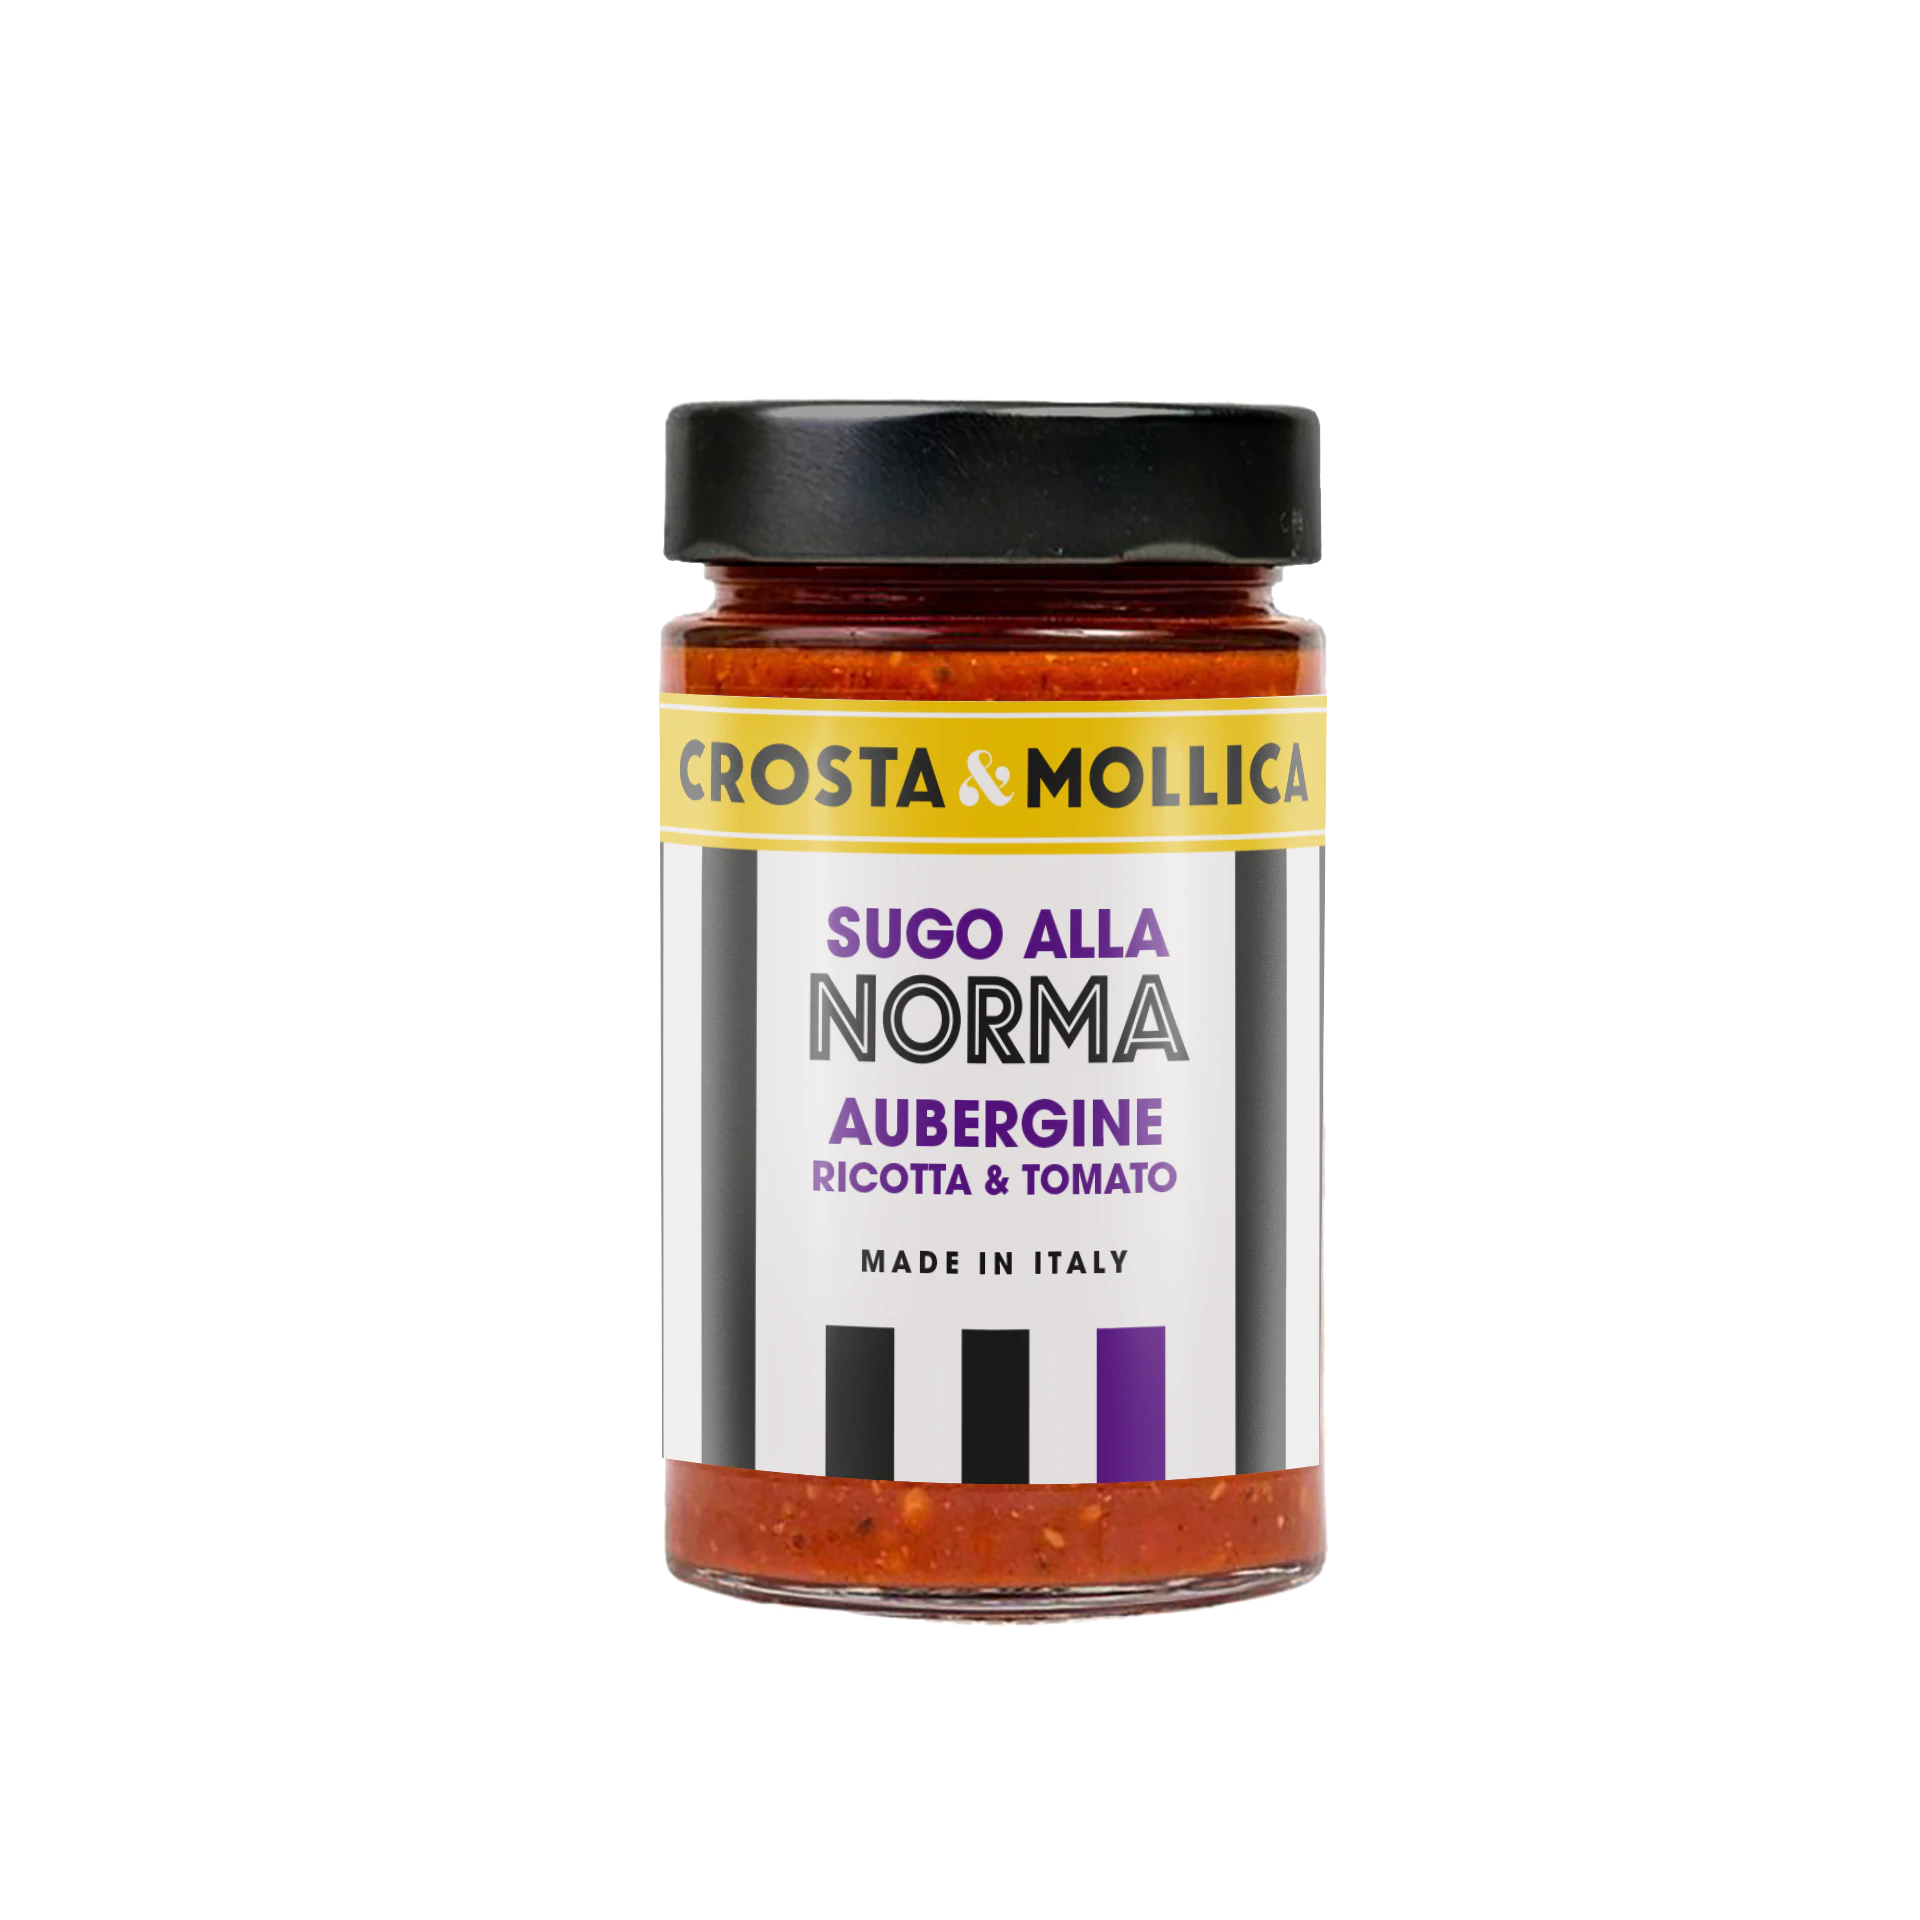 A jar of Sugo alla Norma, the label has white and black vertical stripes running down it and a black lid.